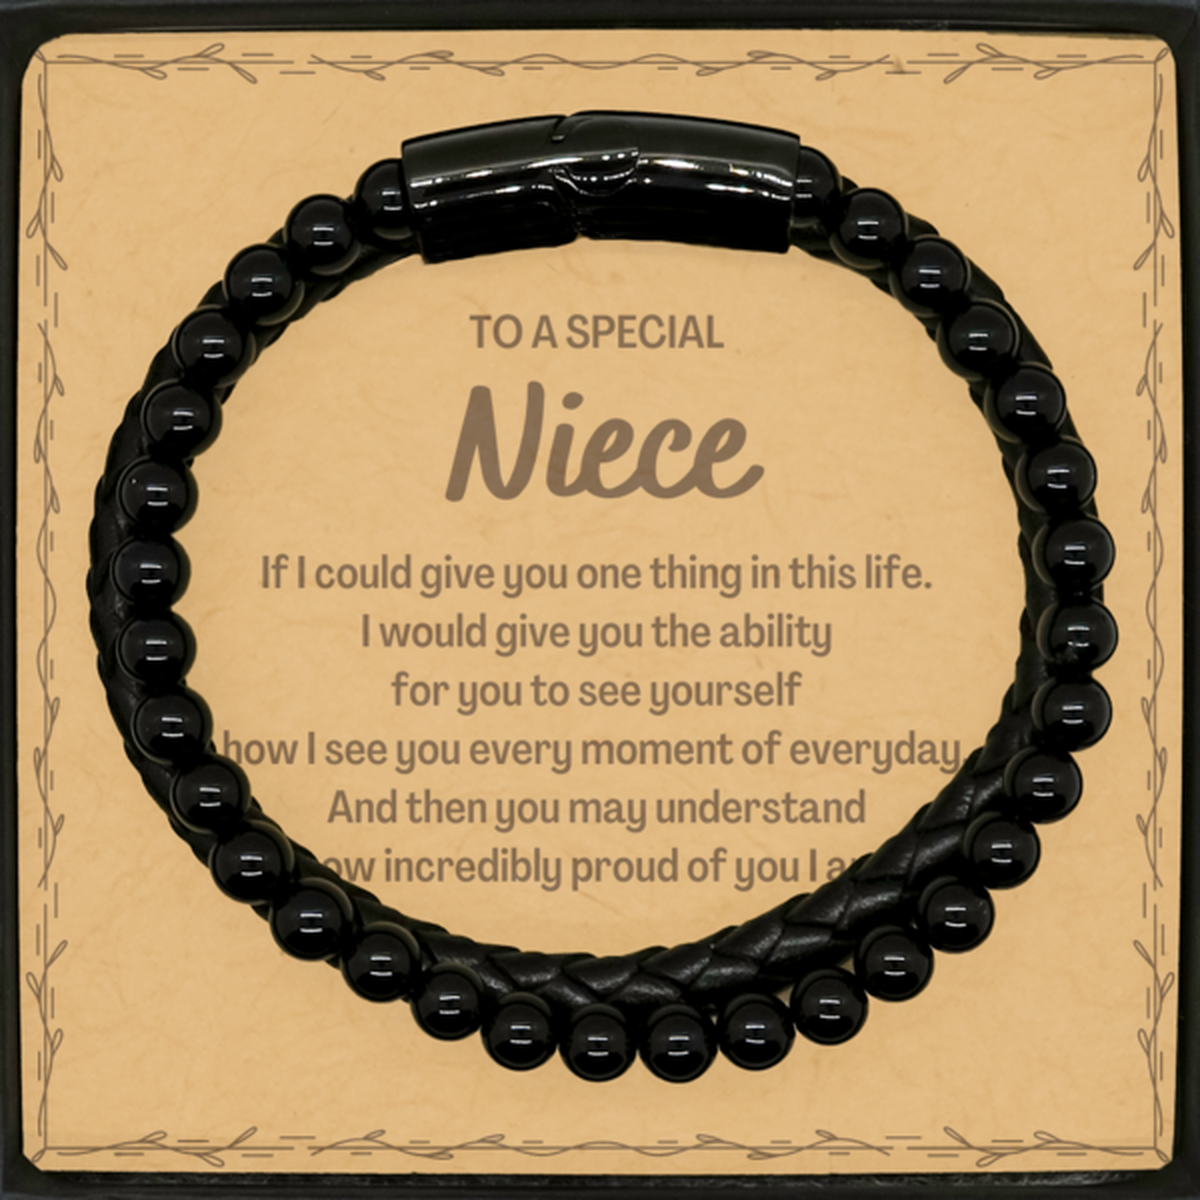 To My Niece Stone Leather Bracelets, Gifts For Niece Message Card, Inspirational Gifts for Christmas Birthday, Epic Gifts for Niece To A Special Niece how incredibly proud of you I am